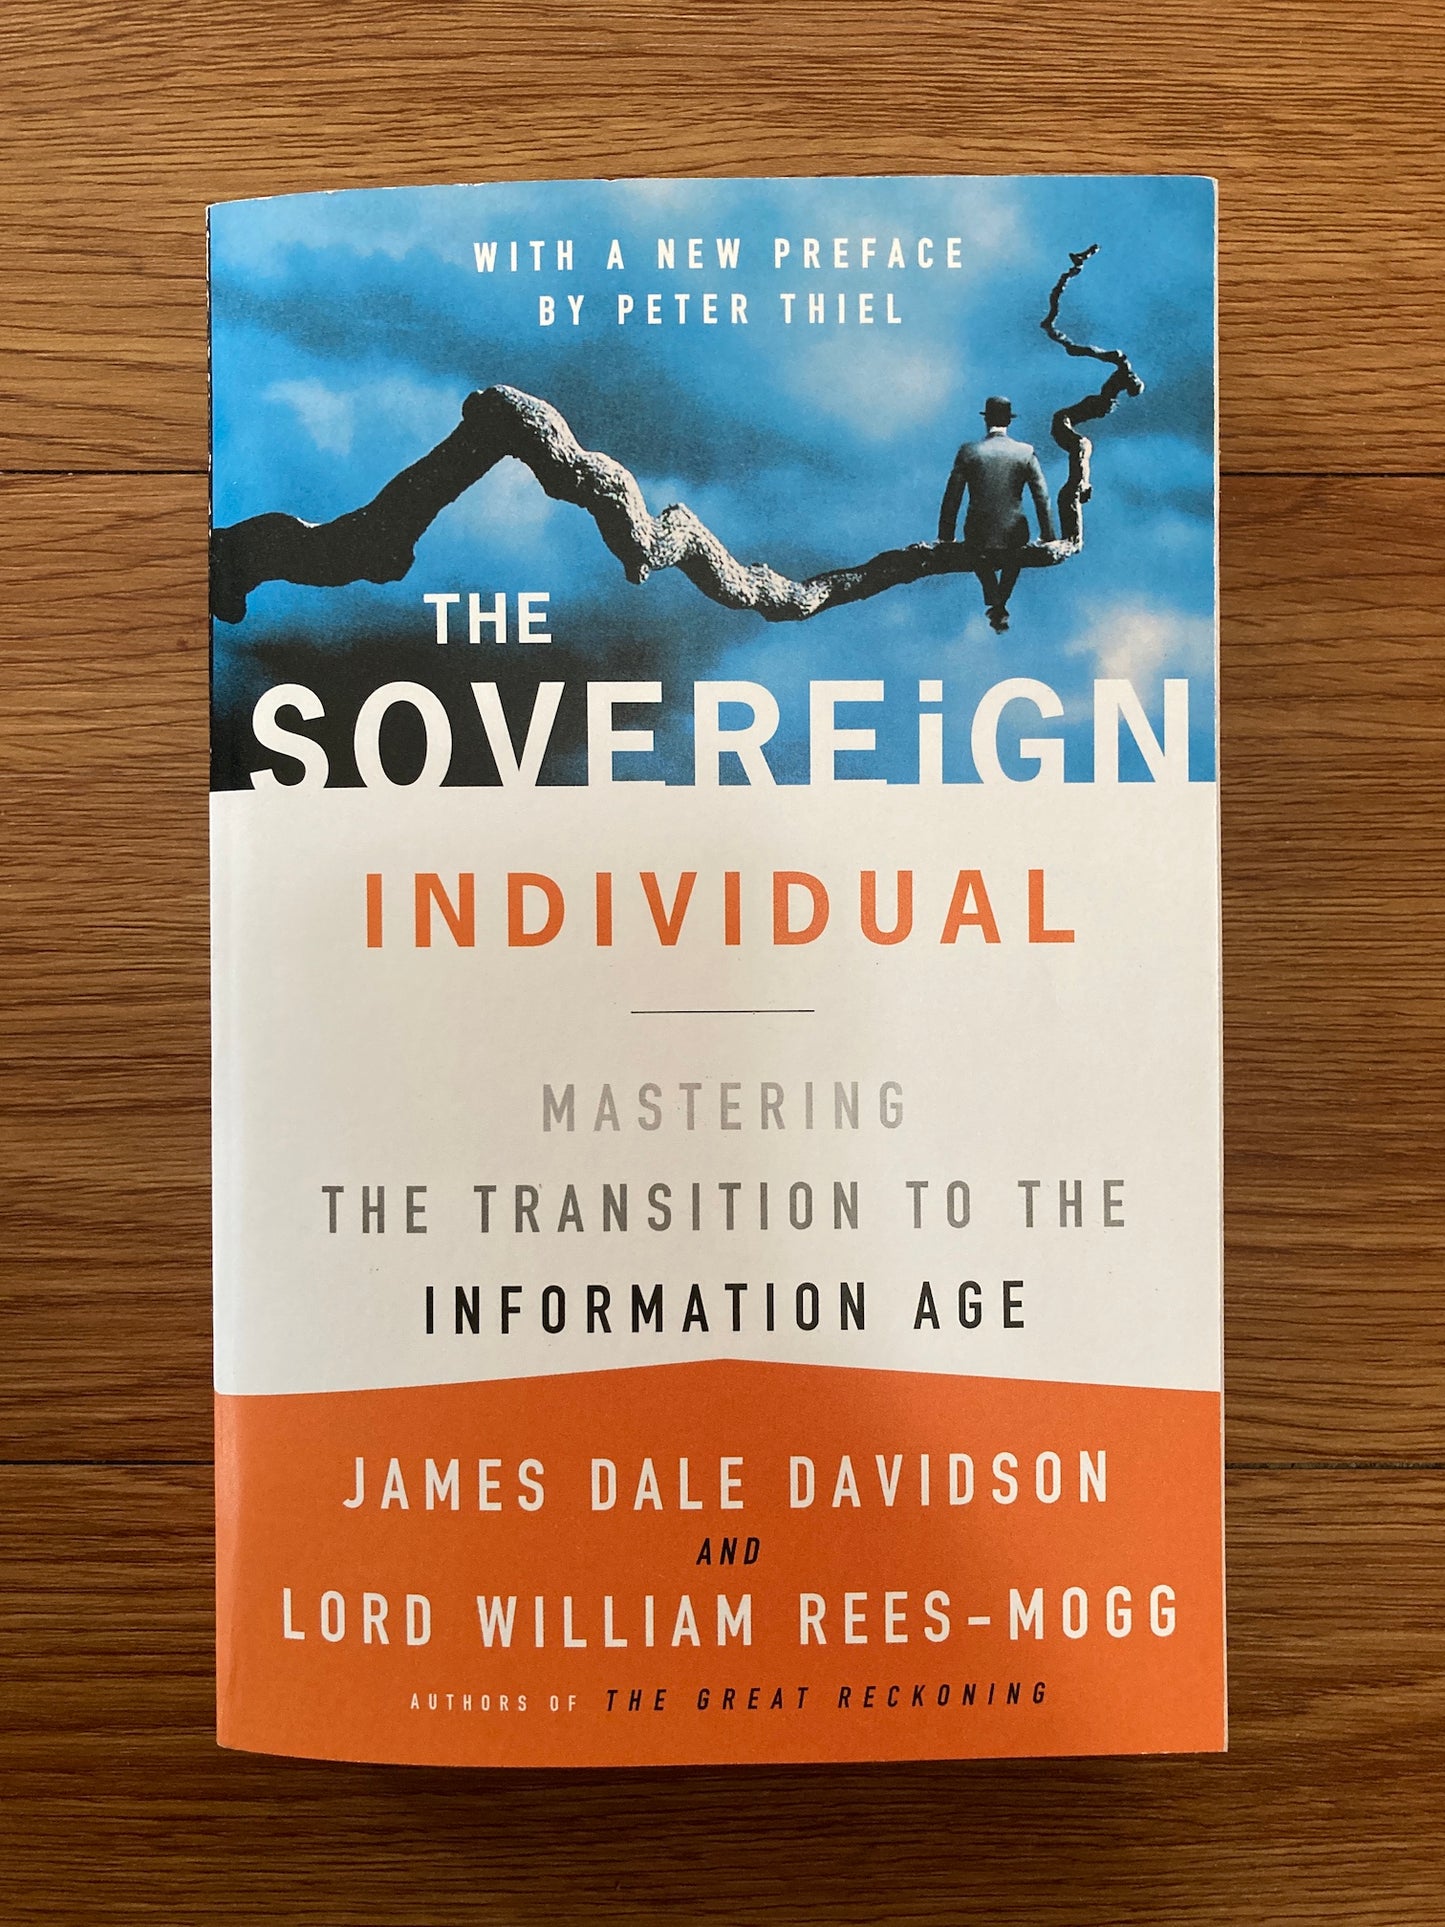 The Sovereign Individual Mastering the Transition to the Info Age